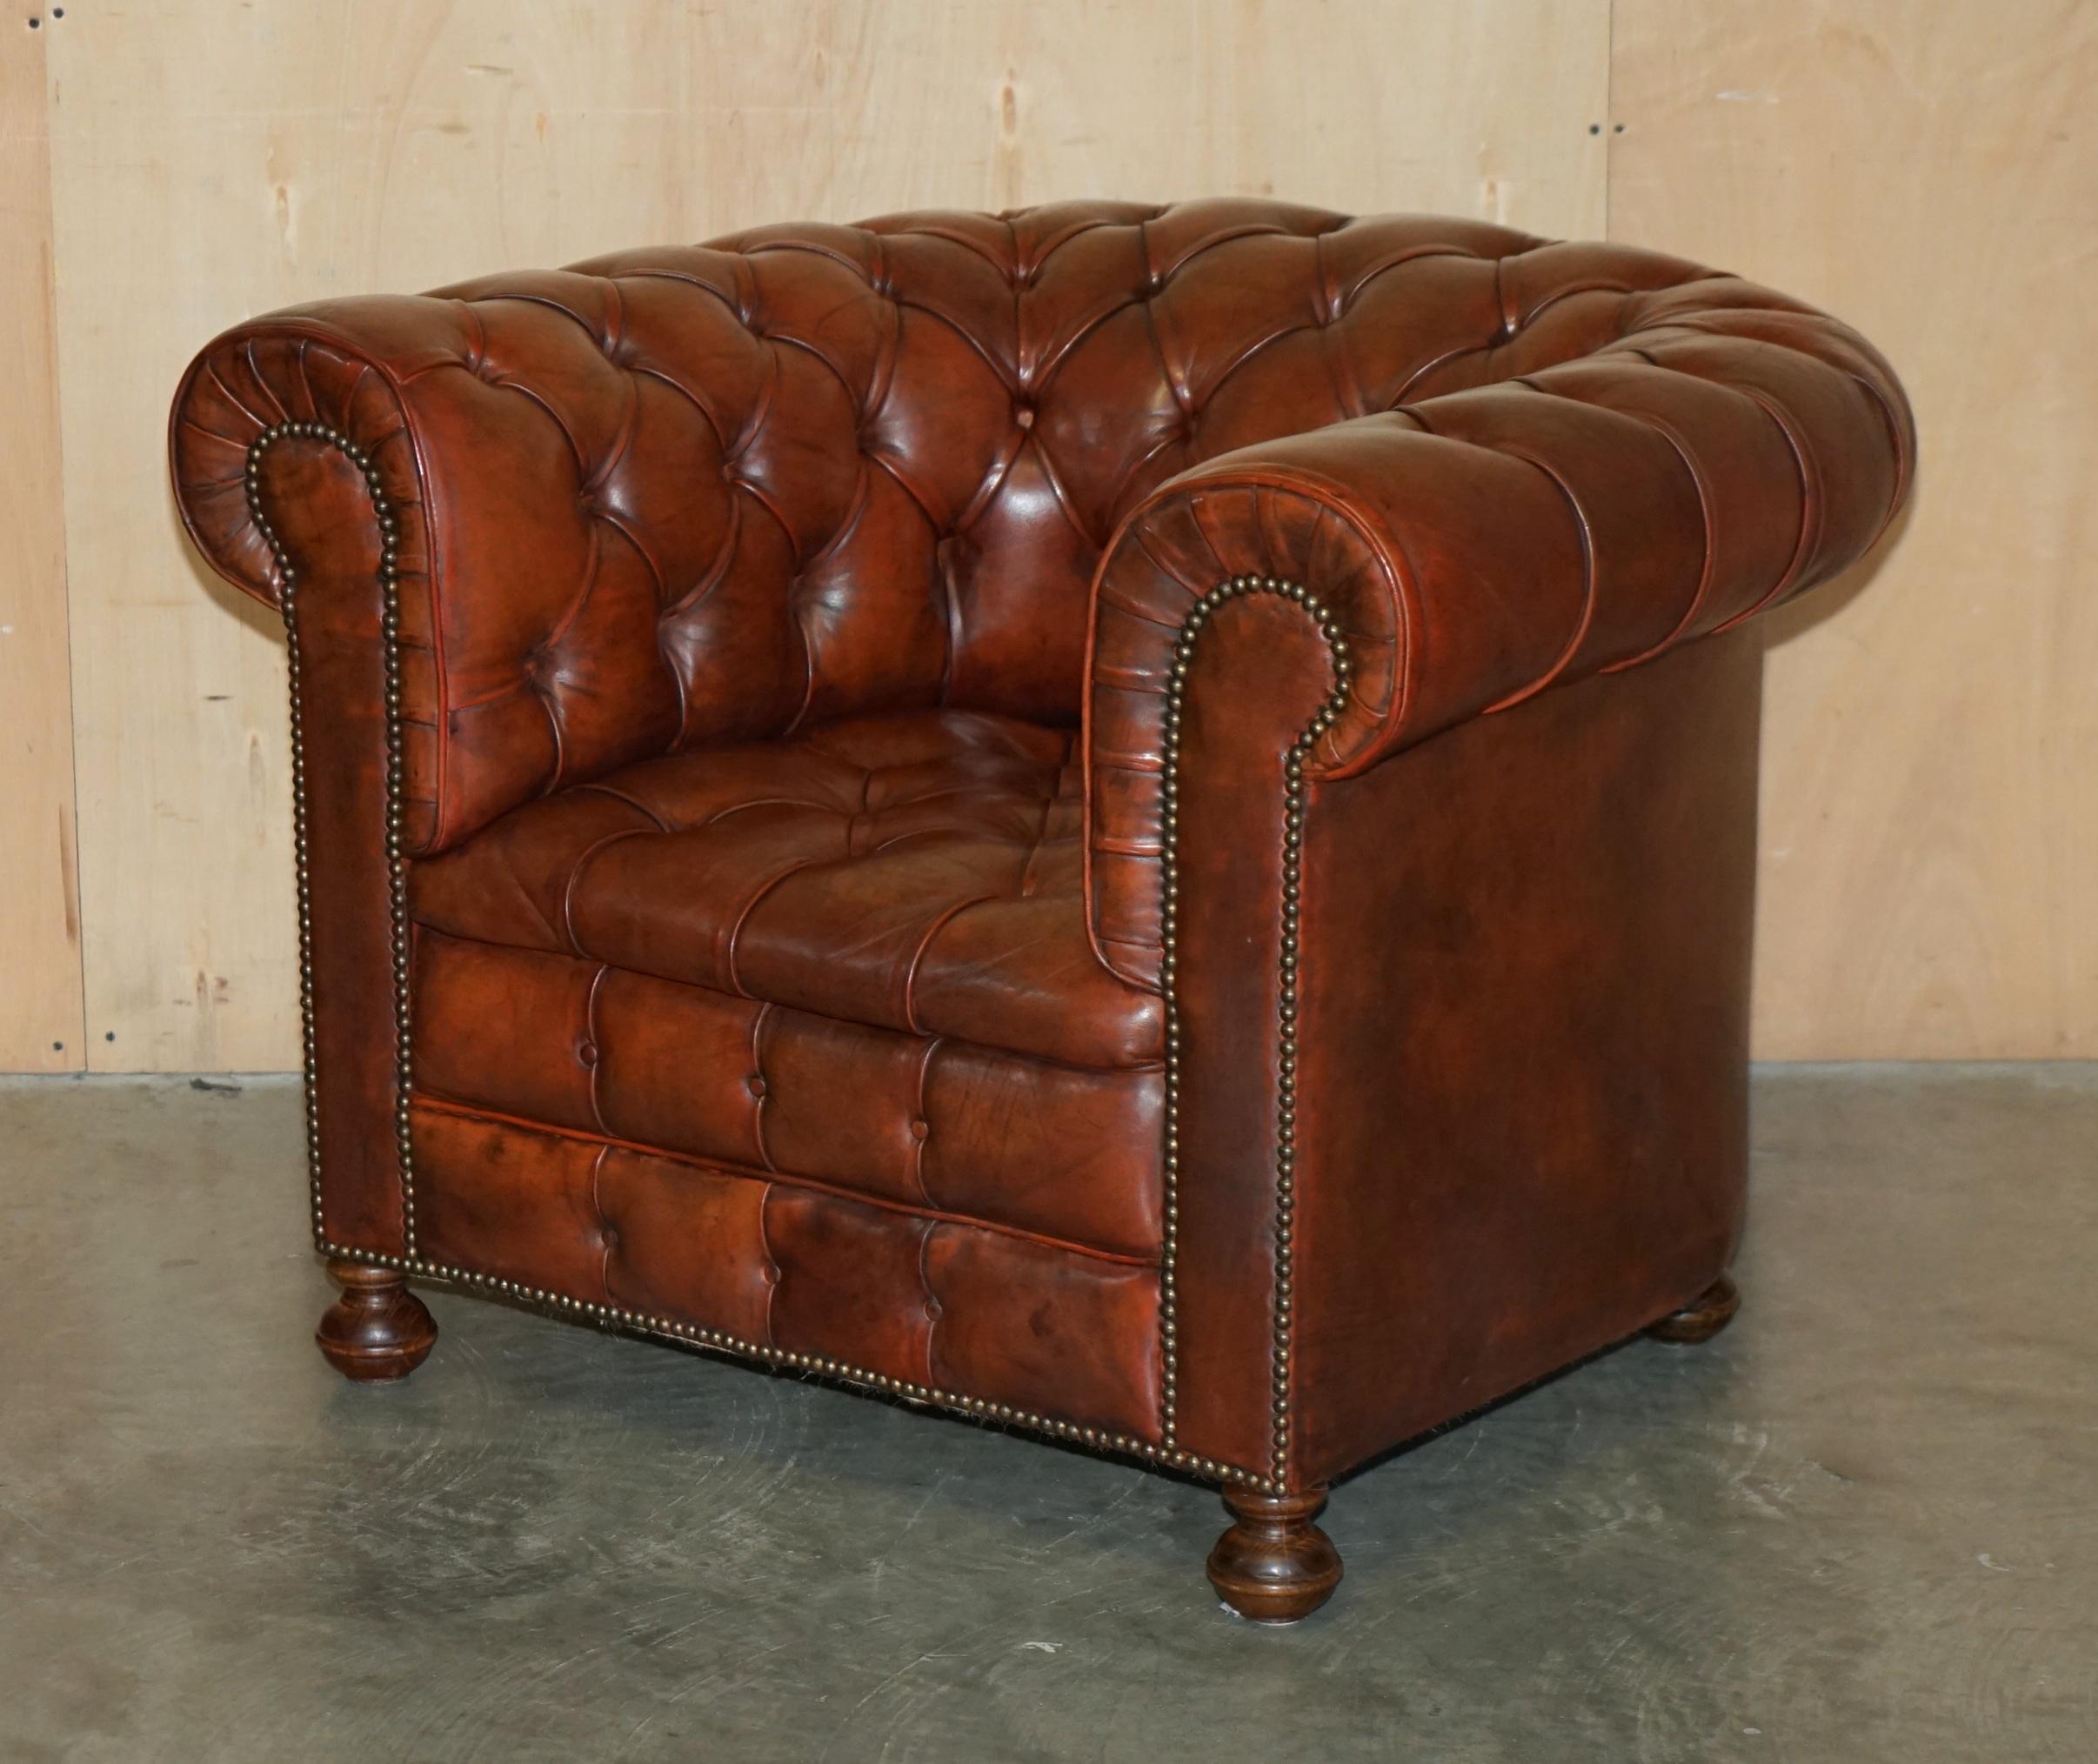 Royal House Antiques

Royal House Antiques is delighted to offer for sale this absolutely stunning pair of original circa 1920's, super comfortable, fully coil sprung, hand dyed saddle brown leather club armchairs with Chesterfield tufting

Please